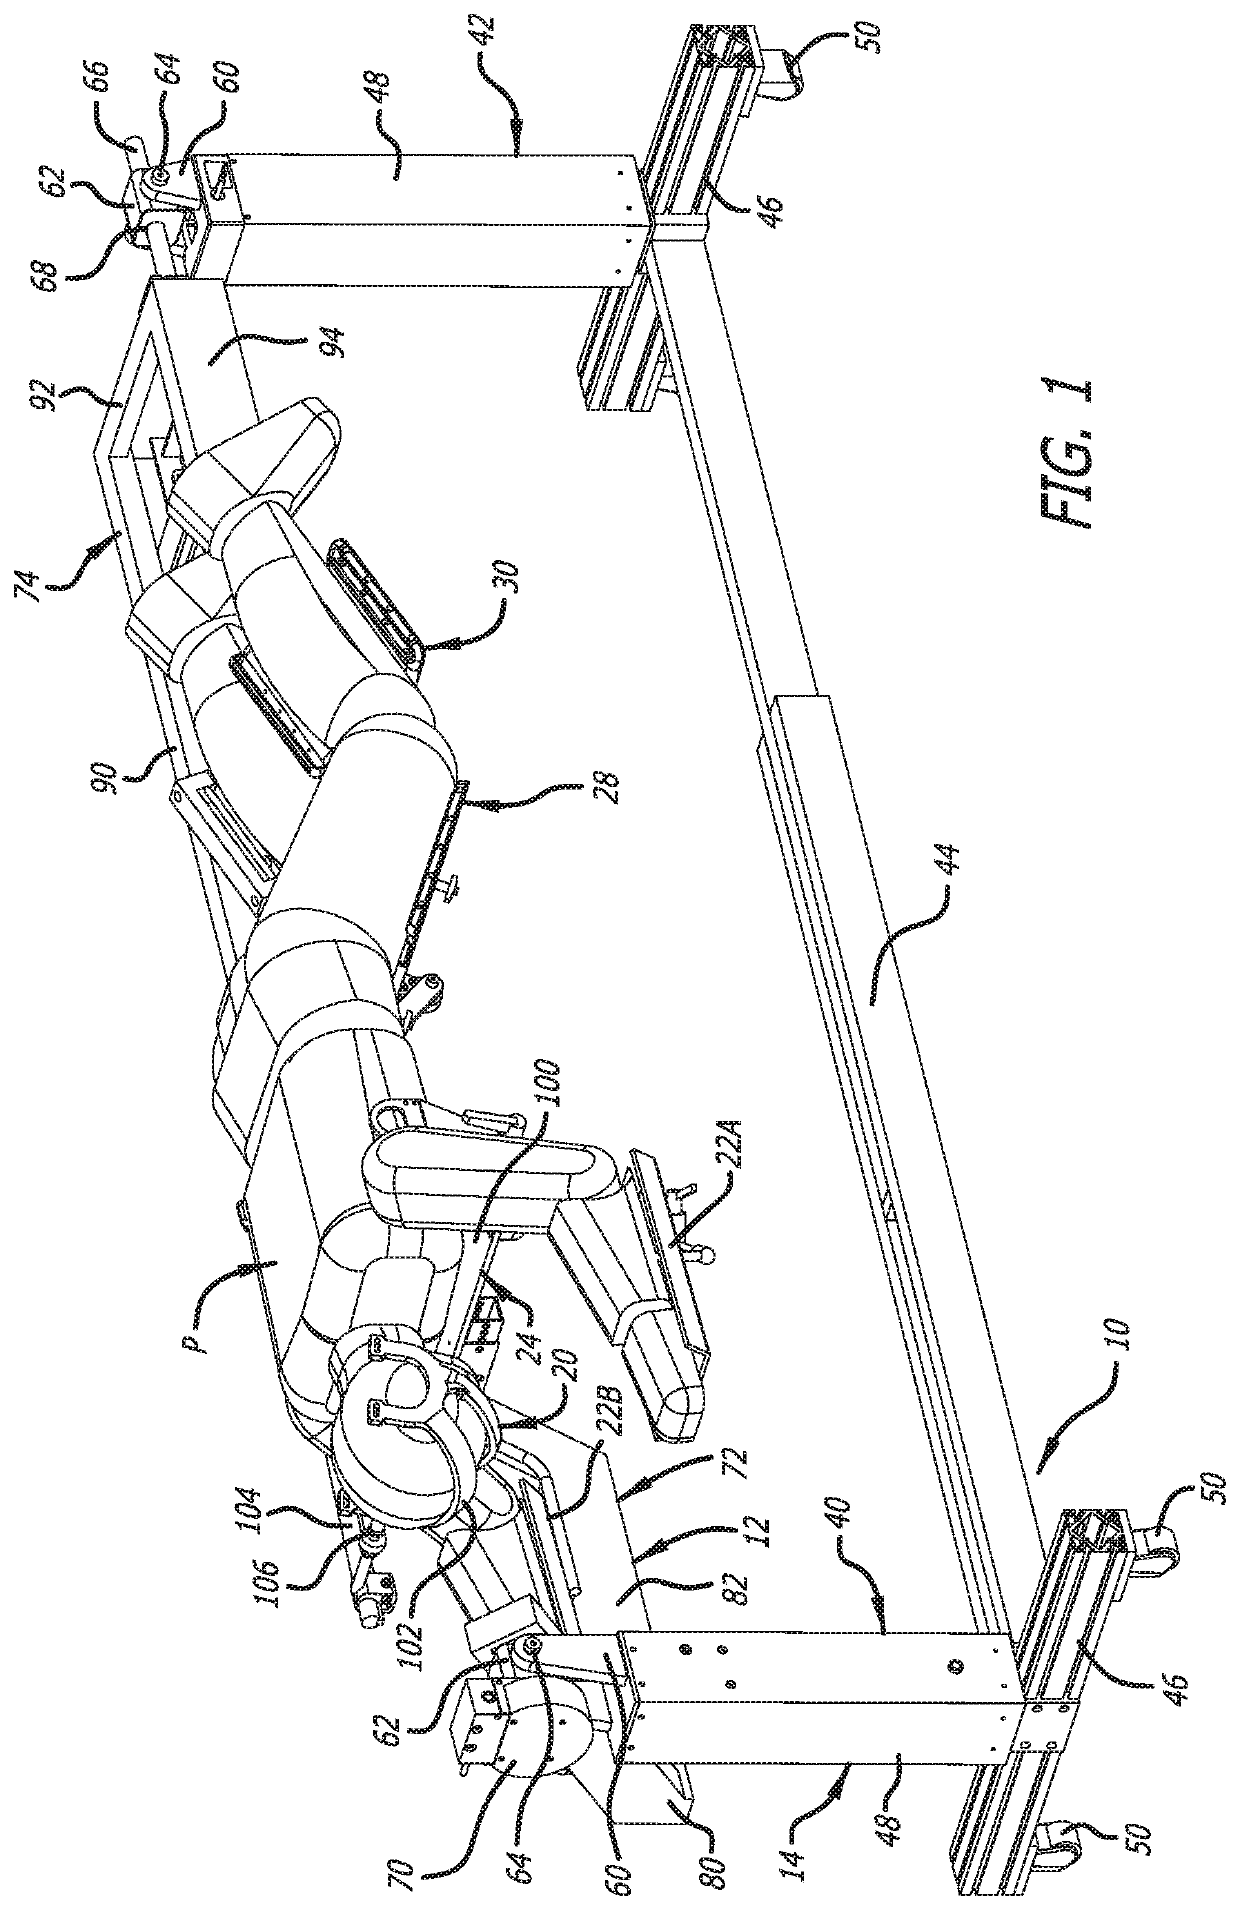 Surgical frame having translating lower beam and moveable linkage or surgical equipment attached thereto and method for use thereof